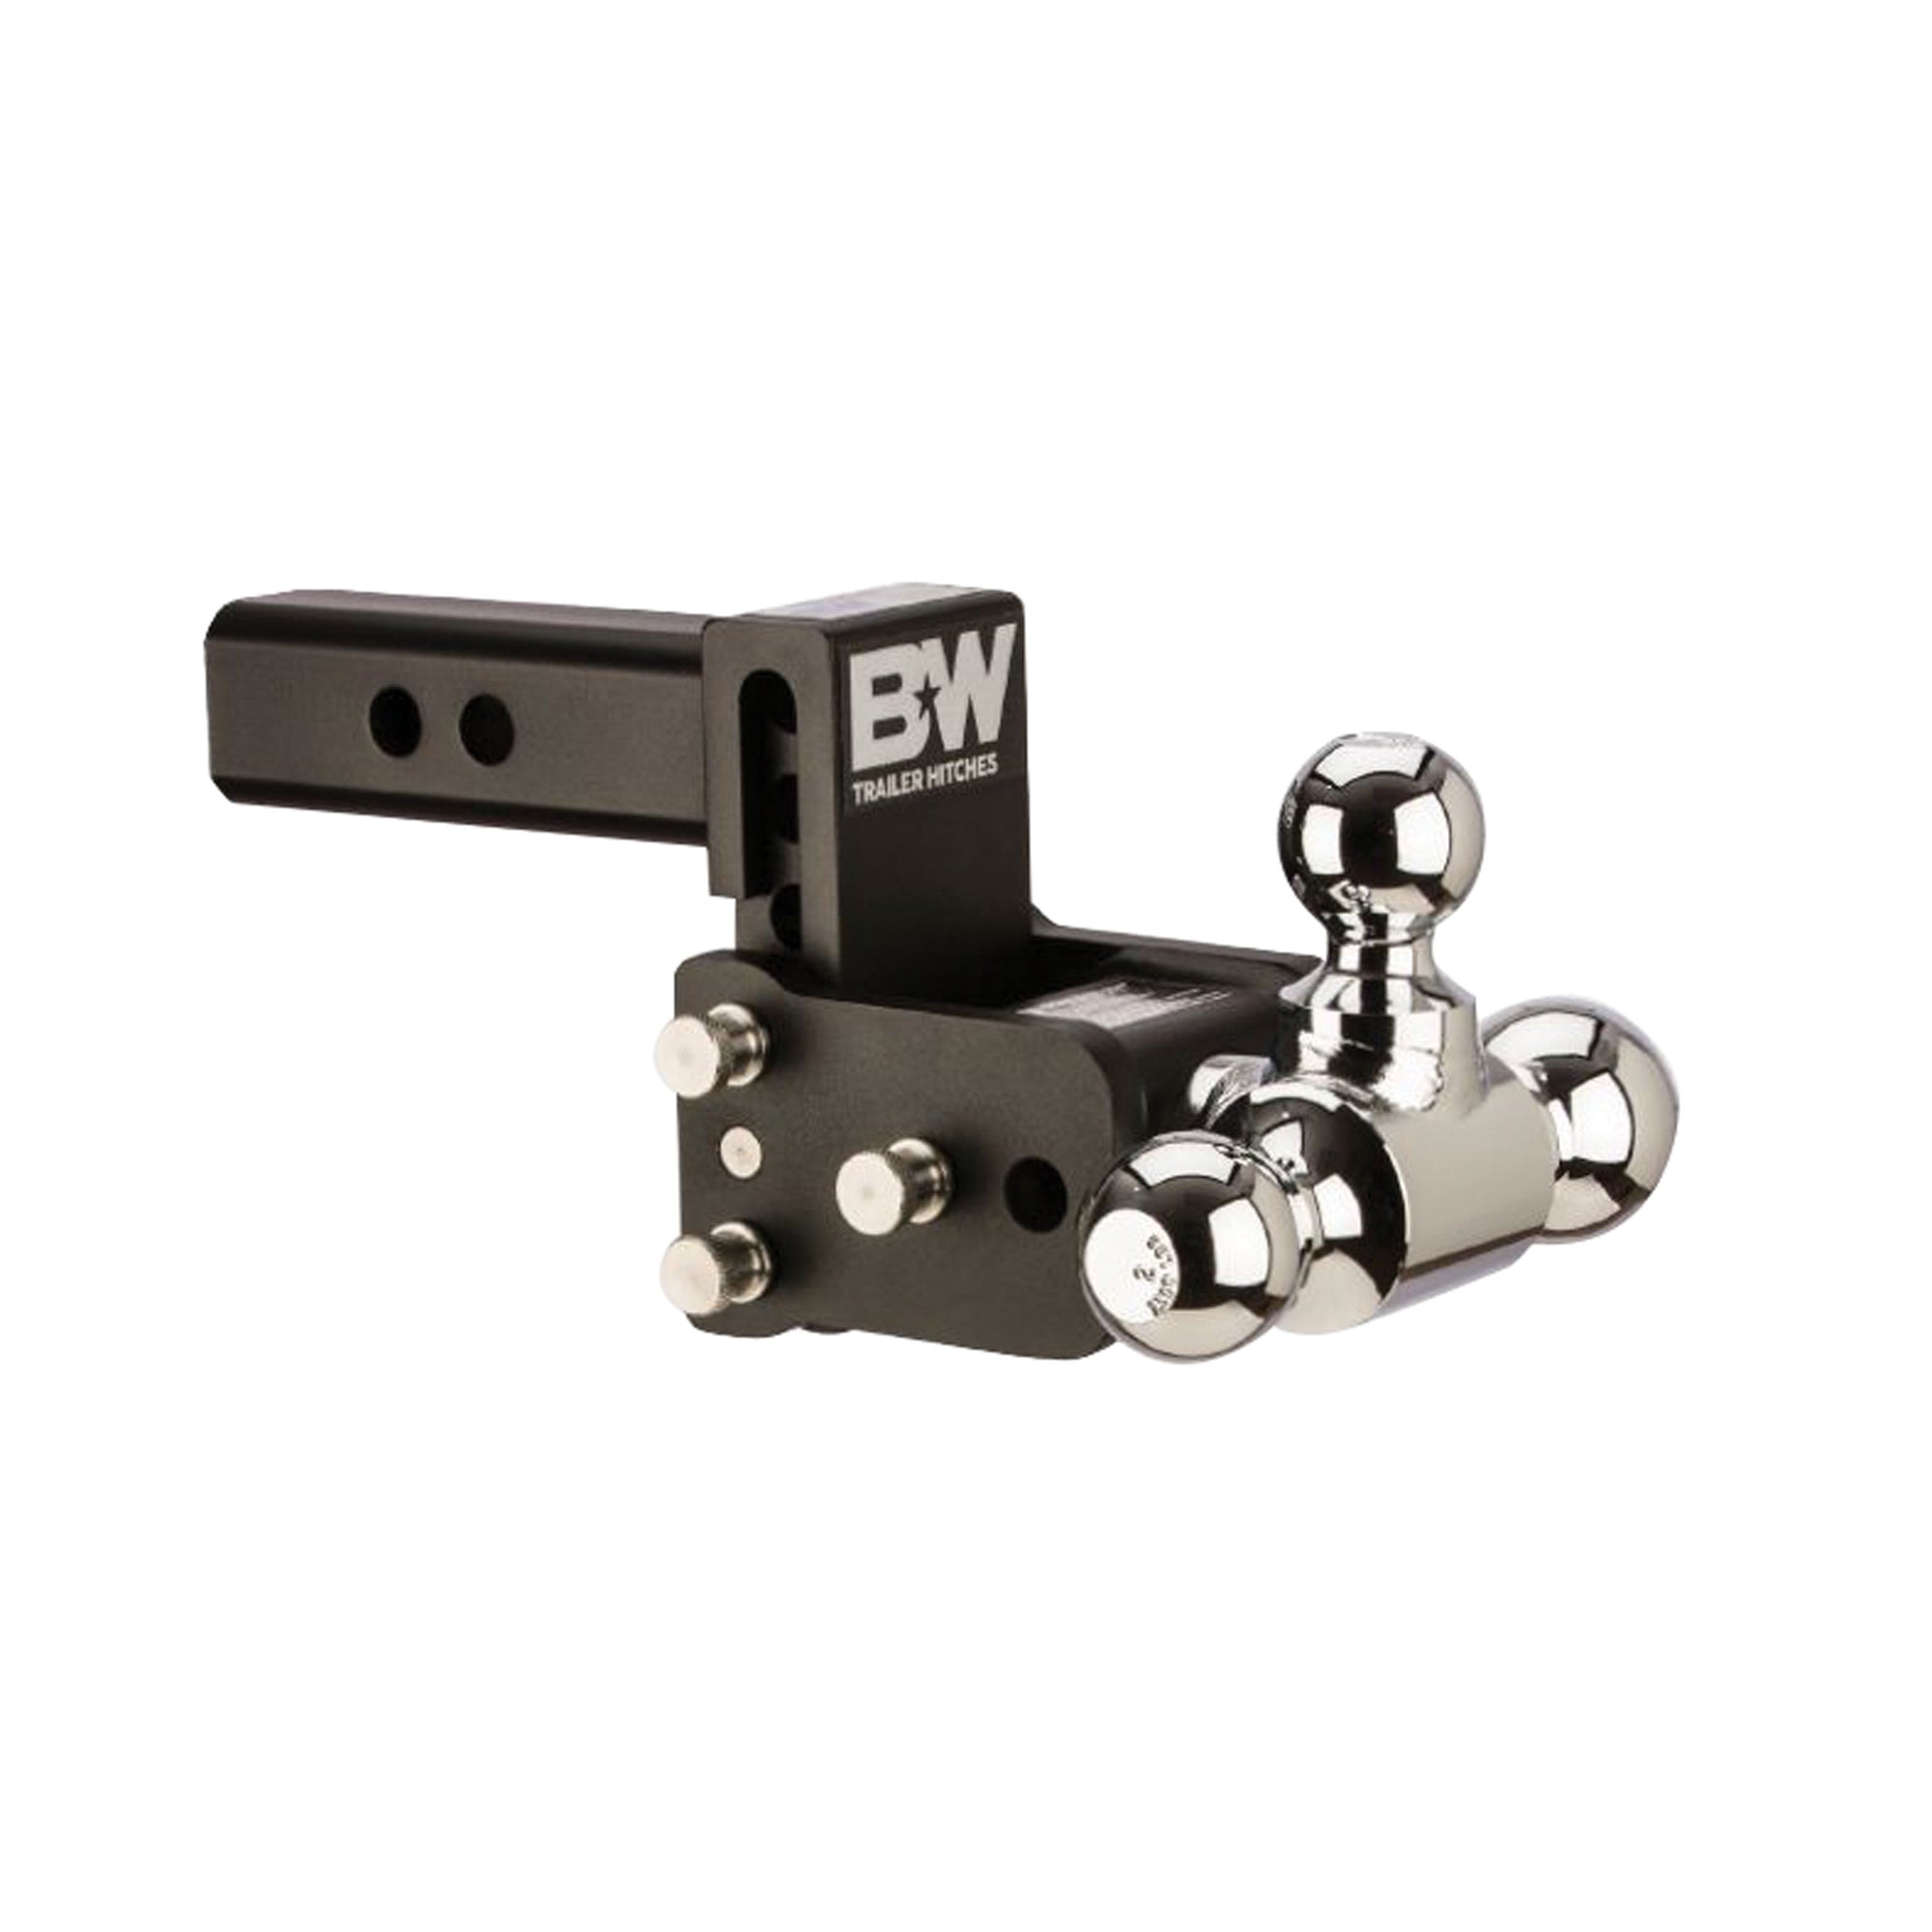 B&W Trailer Hitches TS10047B Tow and Stow Adjustable Ball Mount - 1-7/8", 2" & 2-5/16" Ball, 3" Drop, 3.5" Rise, Black